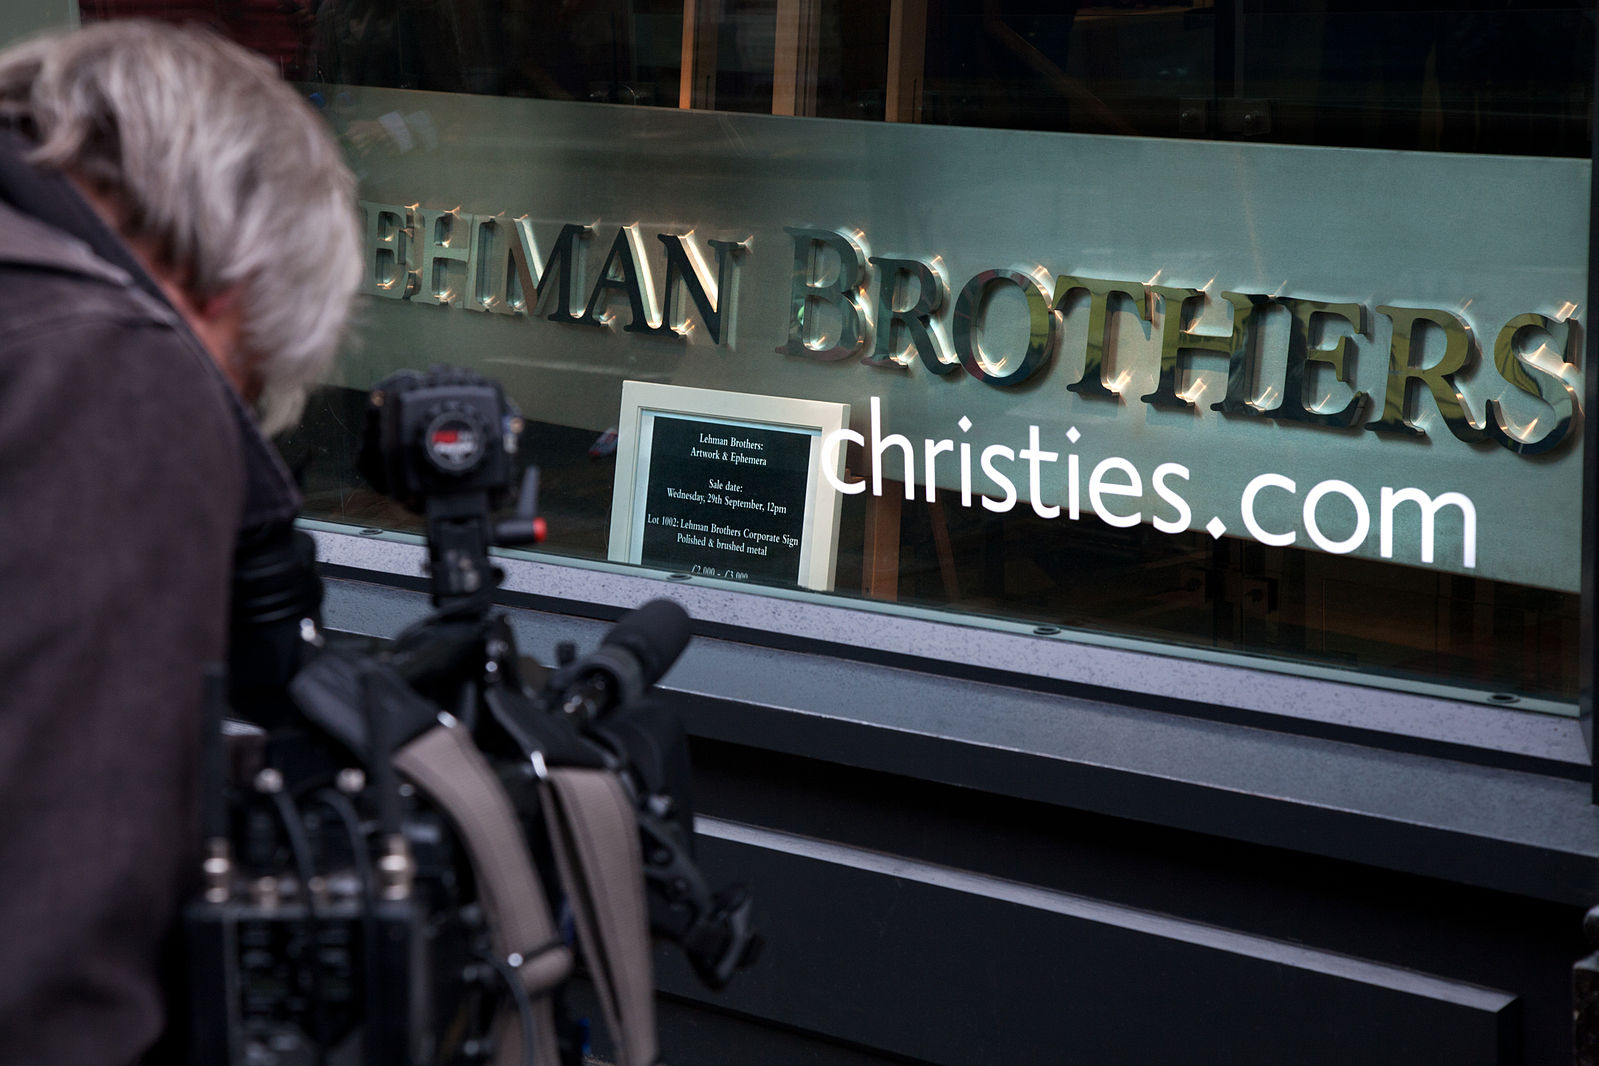 Lehman Brothers auction